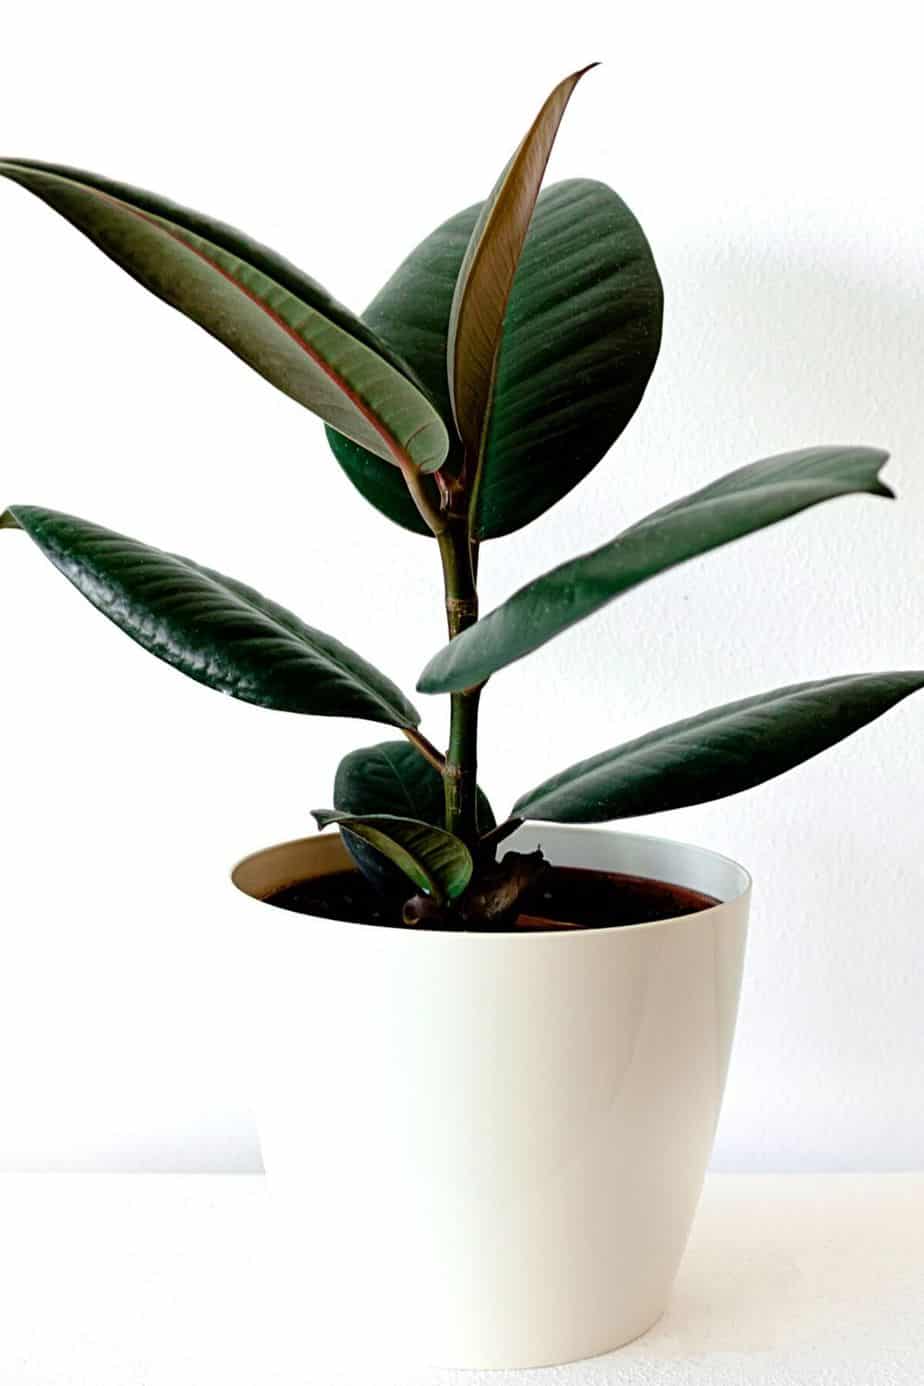 Rubber Fig is a low-maintenance tropical plant that you can place by your northwest-facing window